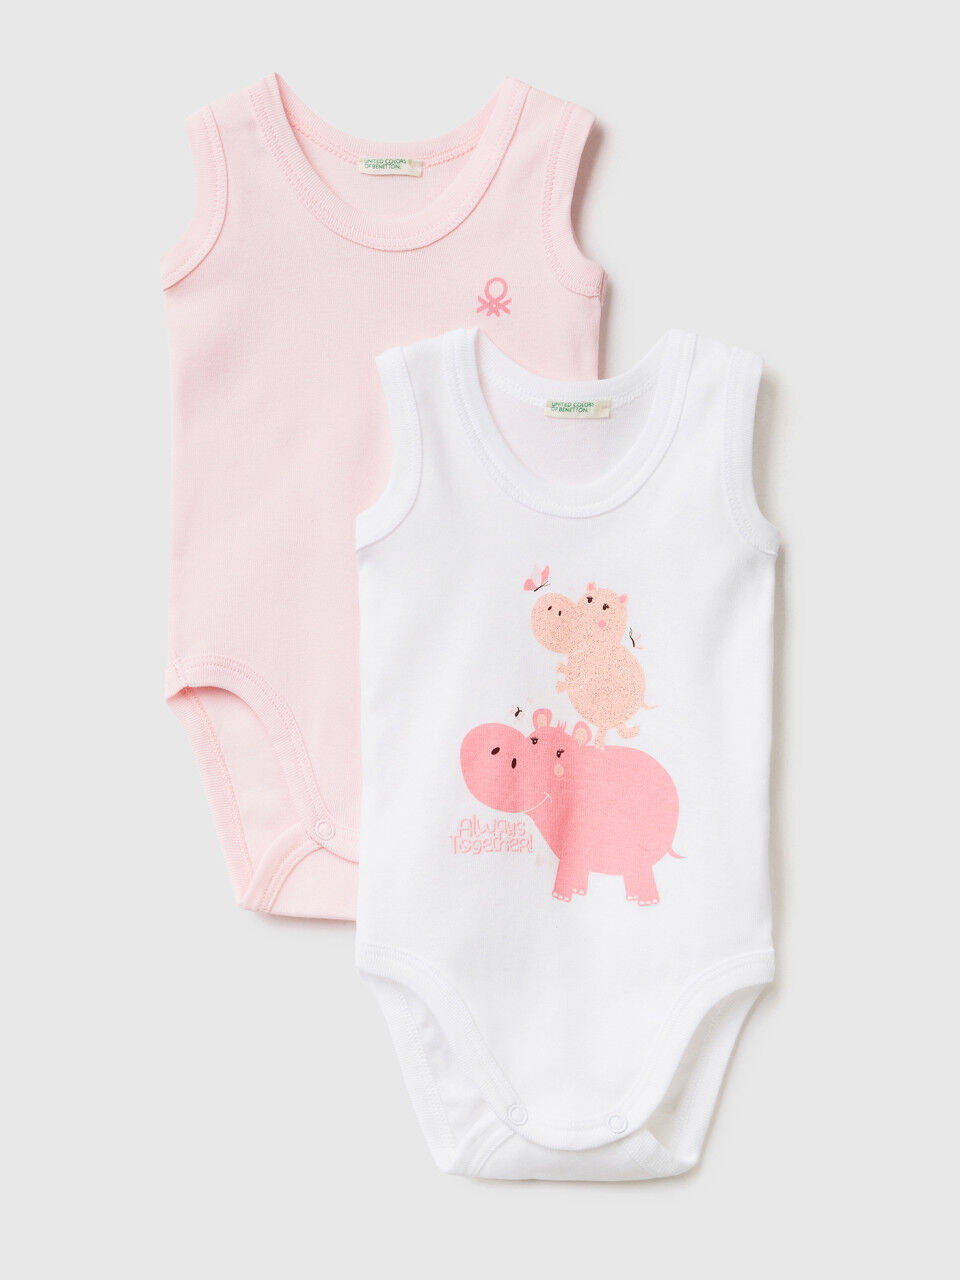 Two bodysuits in organic cotton with print